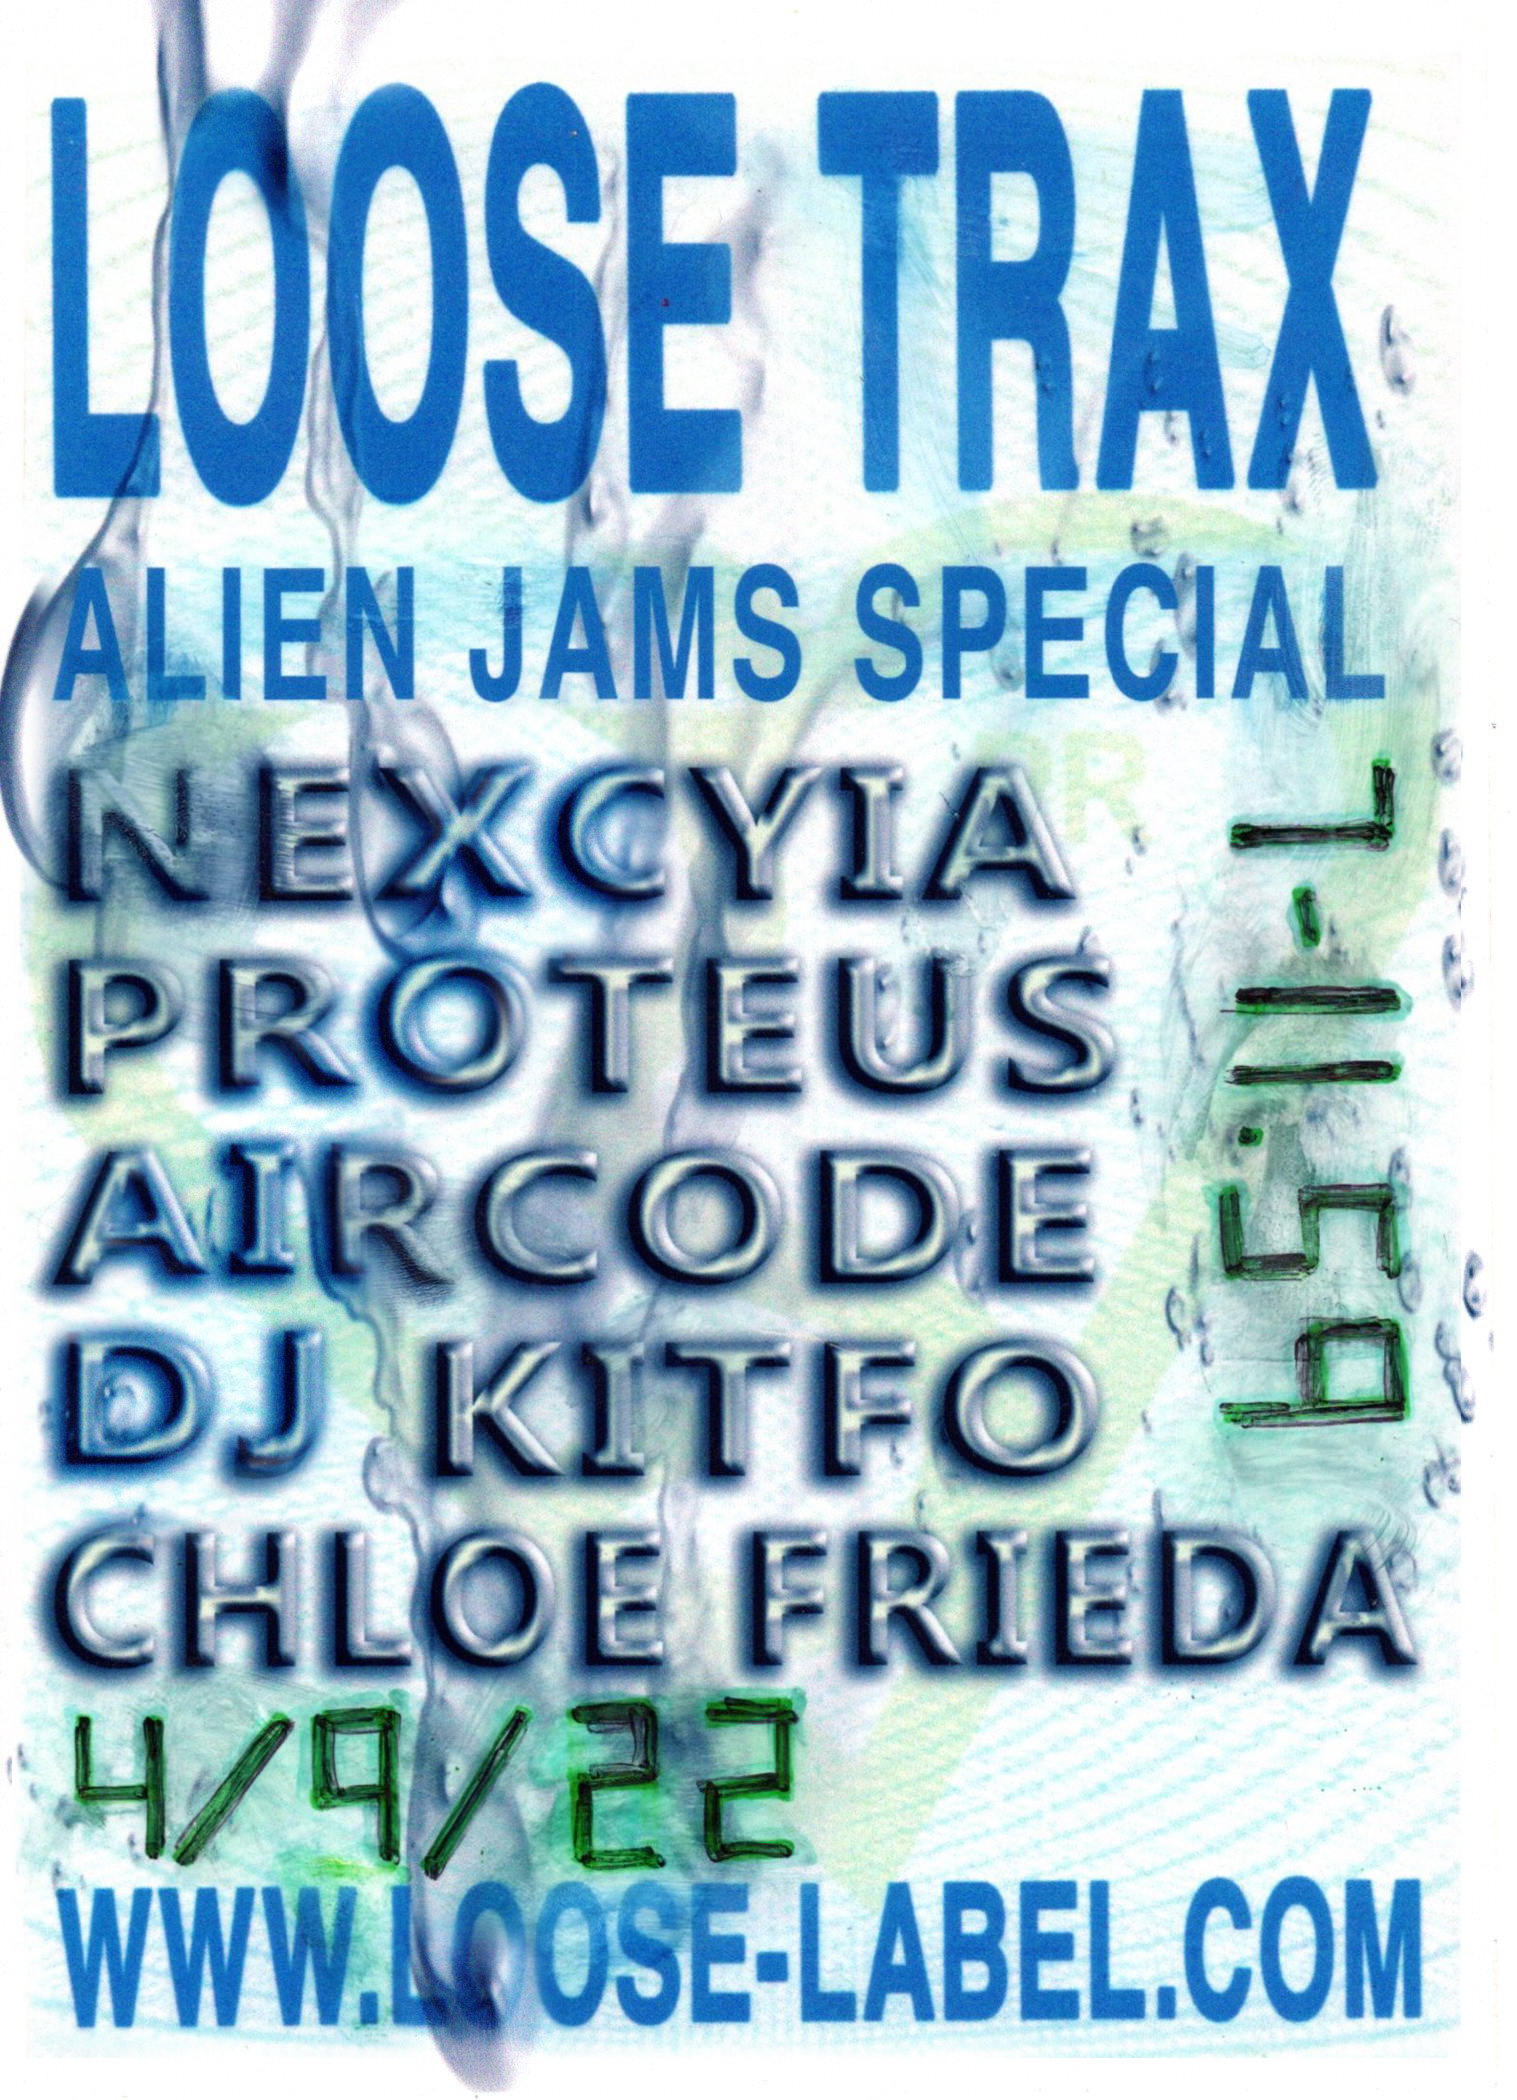 LOOSE TRAX - Flyer front